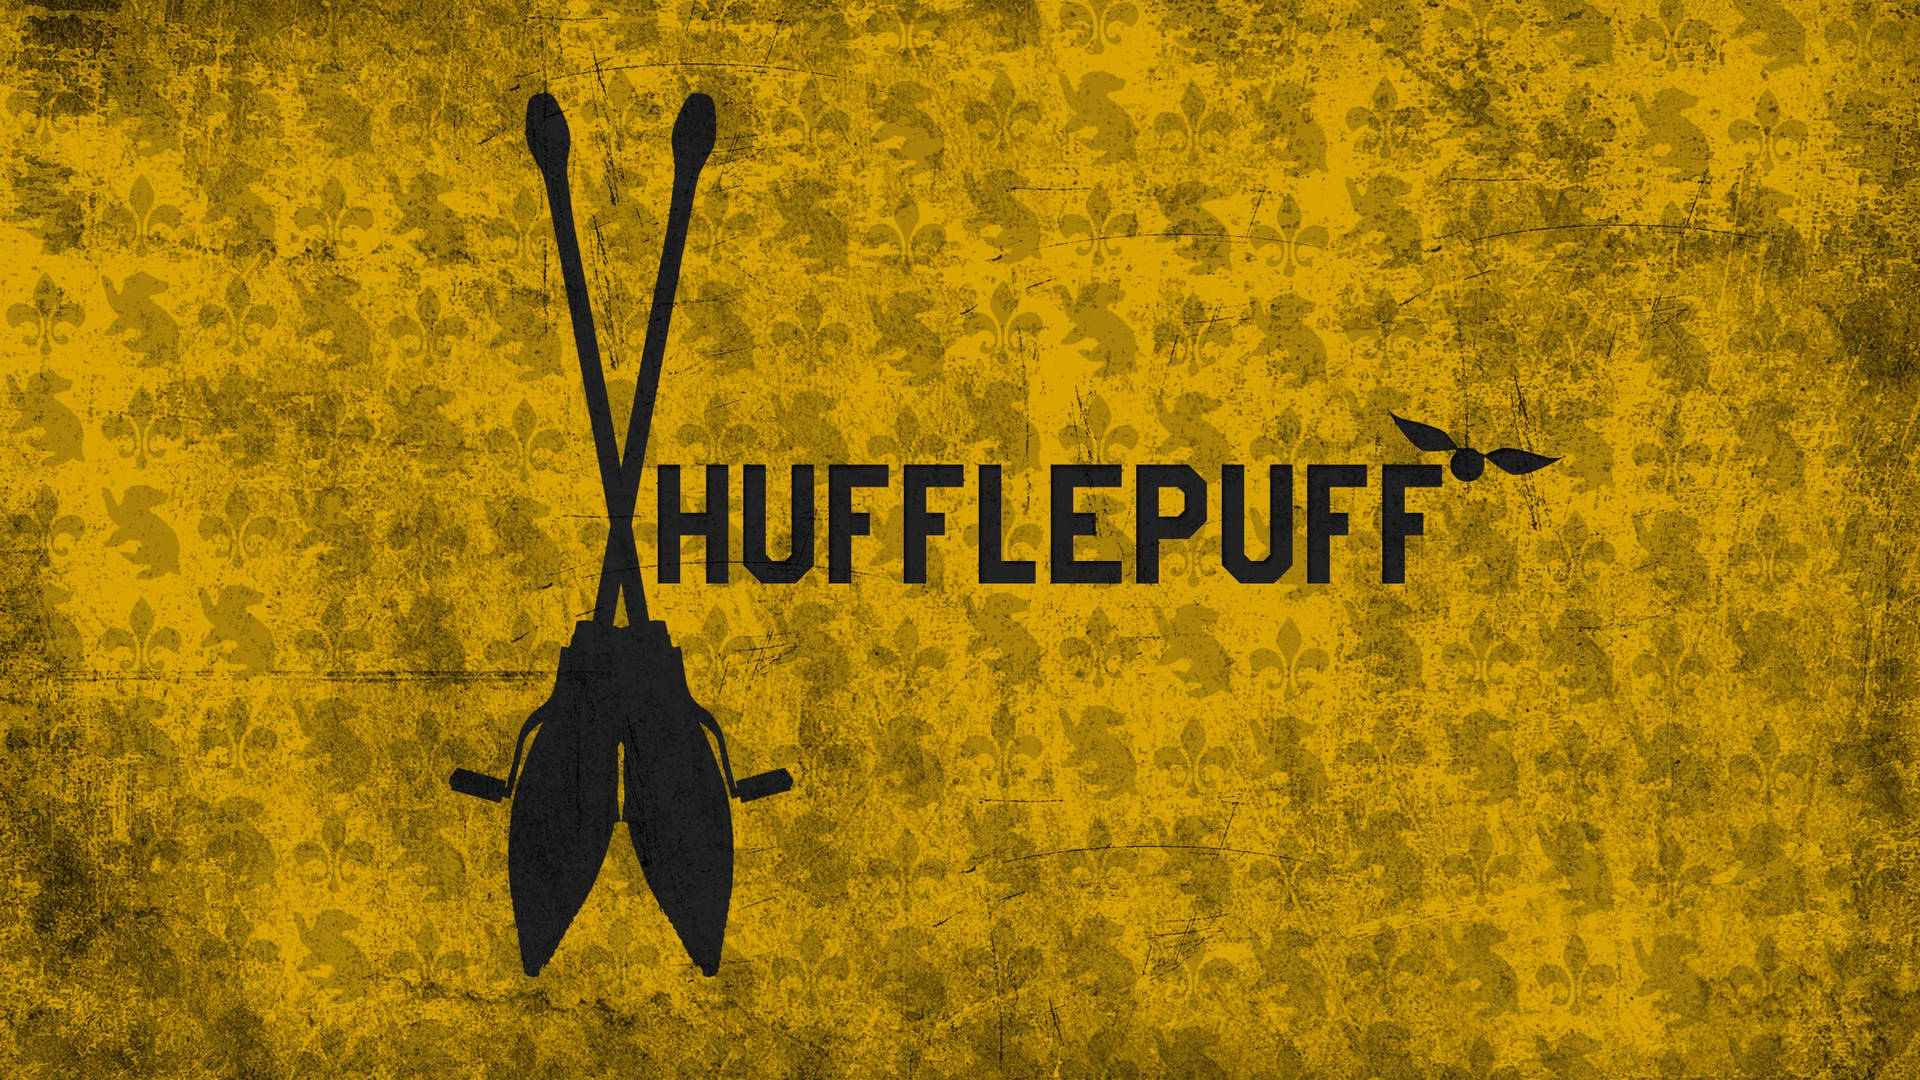 Harry Potter Houses Hufflepuff Quidditch